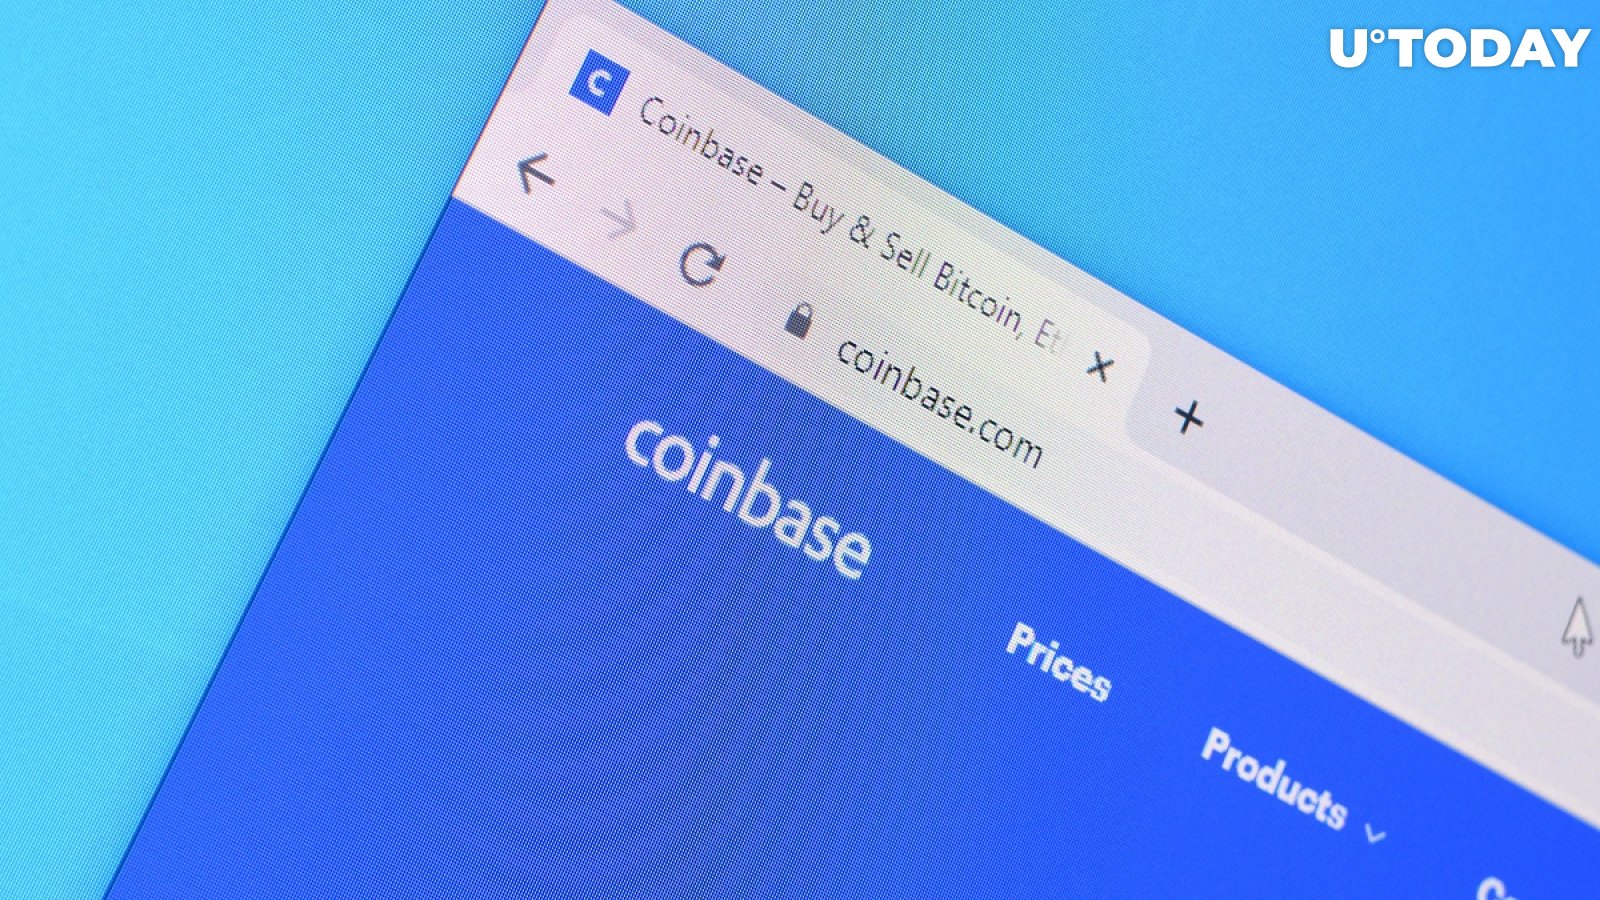 Crypto Giant Coinbase to Expand Its Footprint in Europe Despite Mass Layoffs